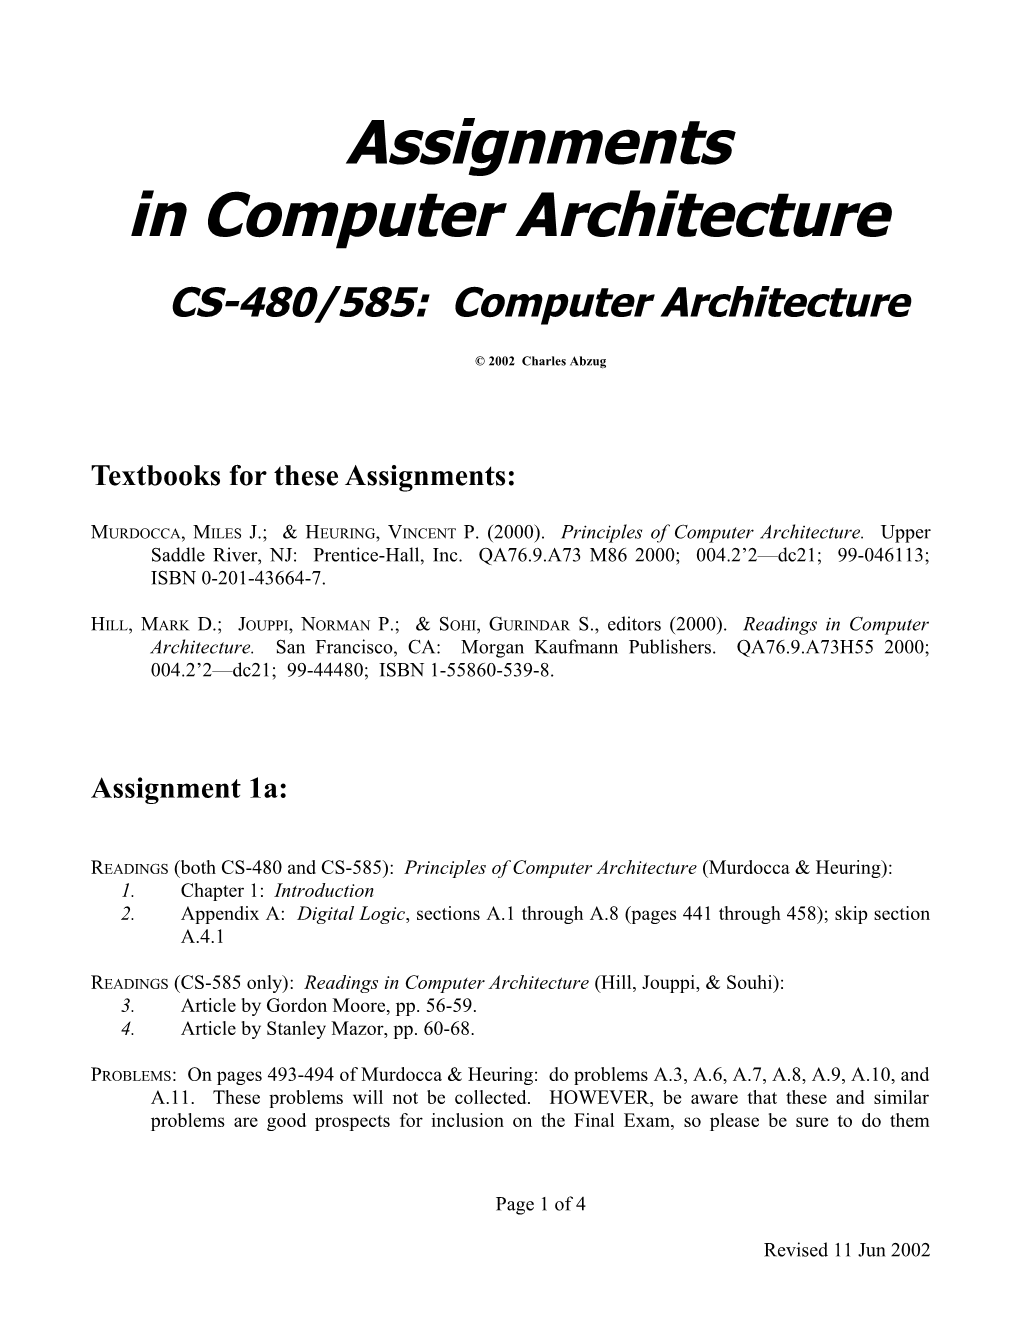 CS-480/585 Assignments: Computer Architecture